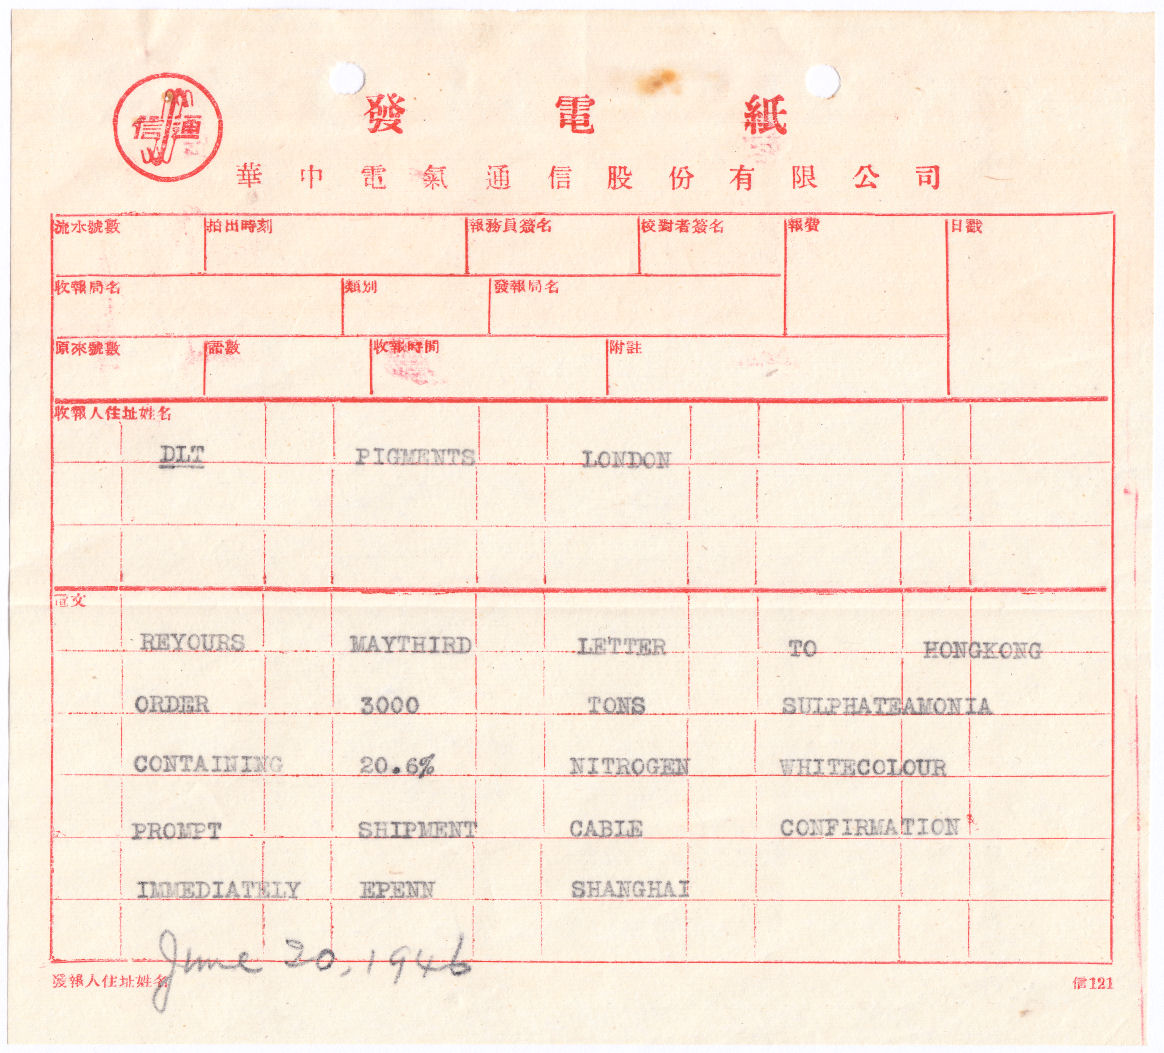 Form of 20-6-46